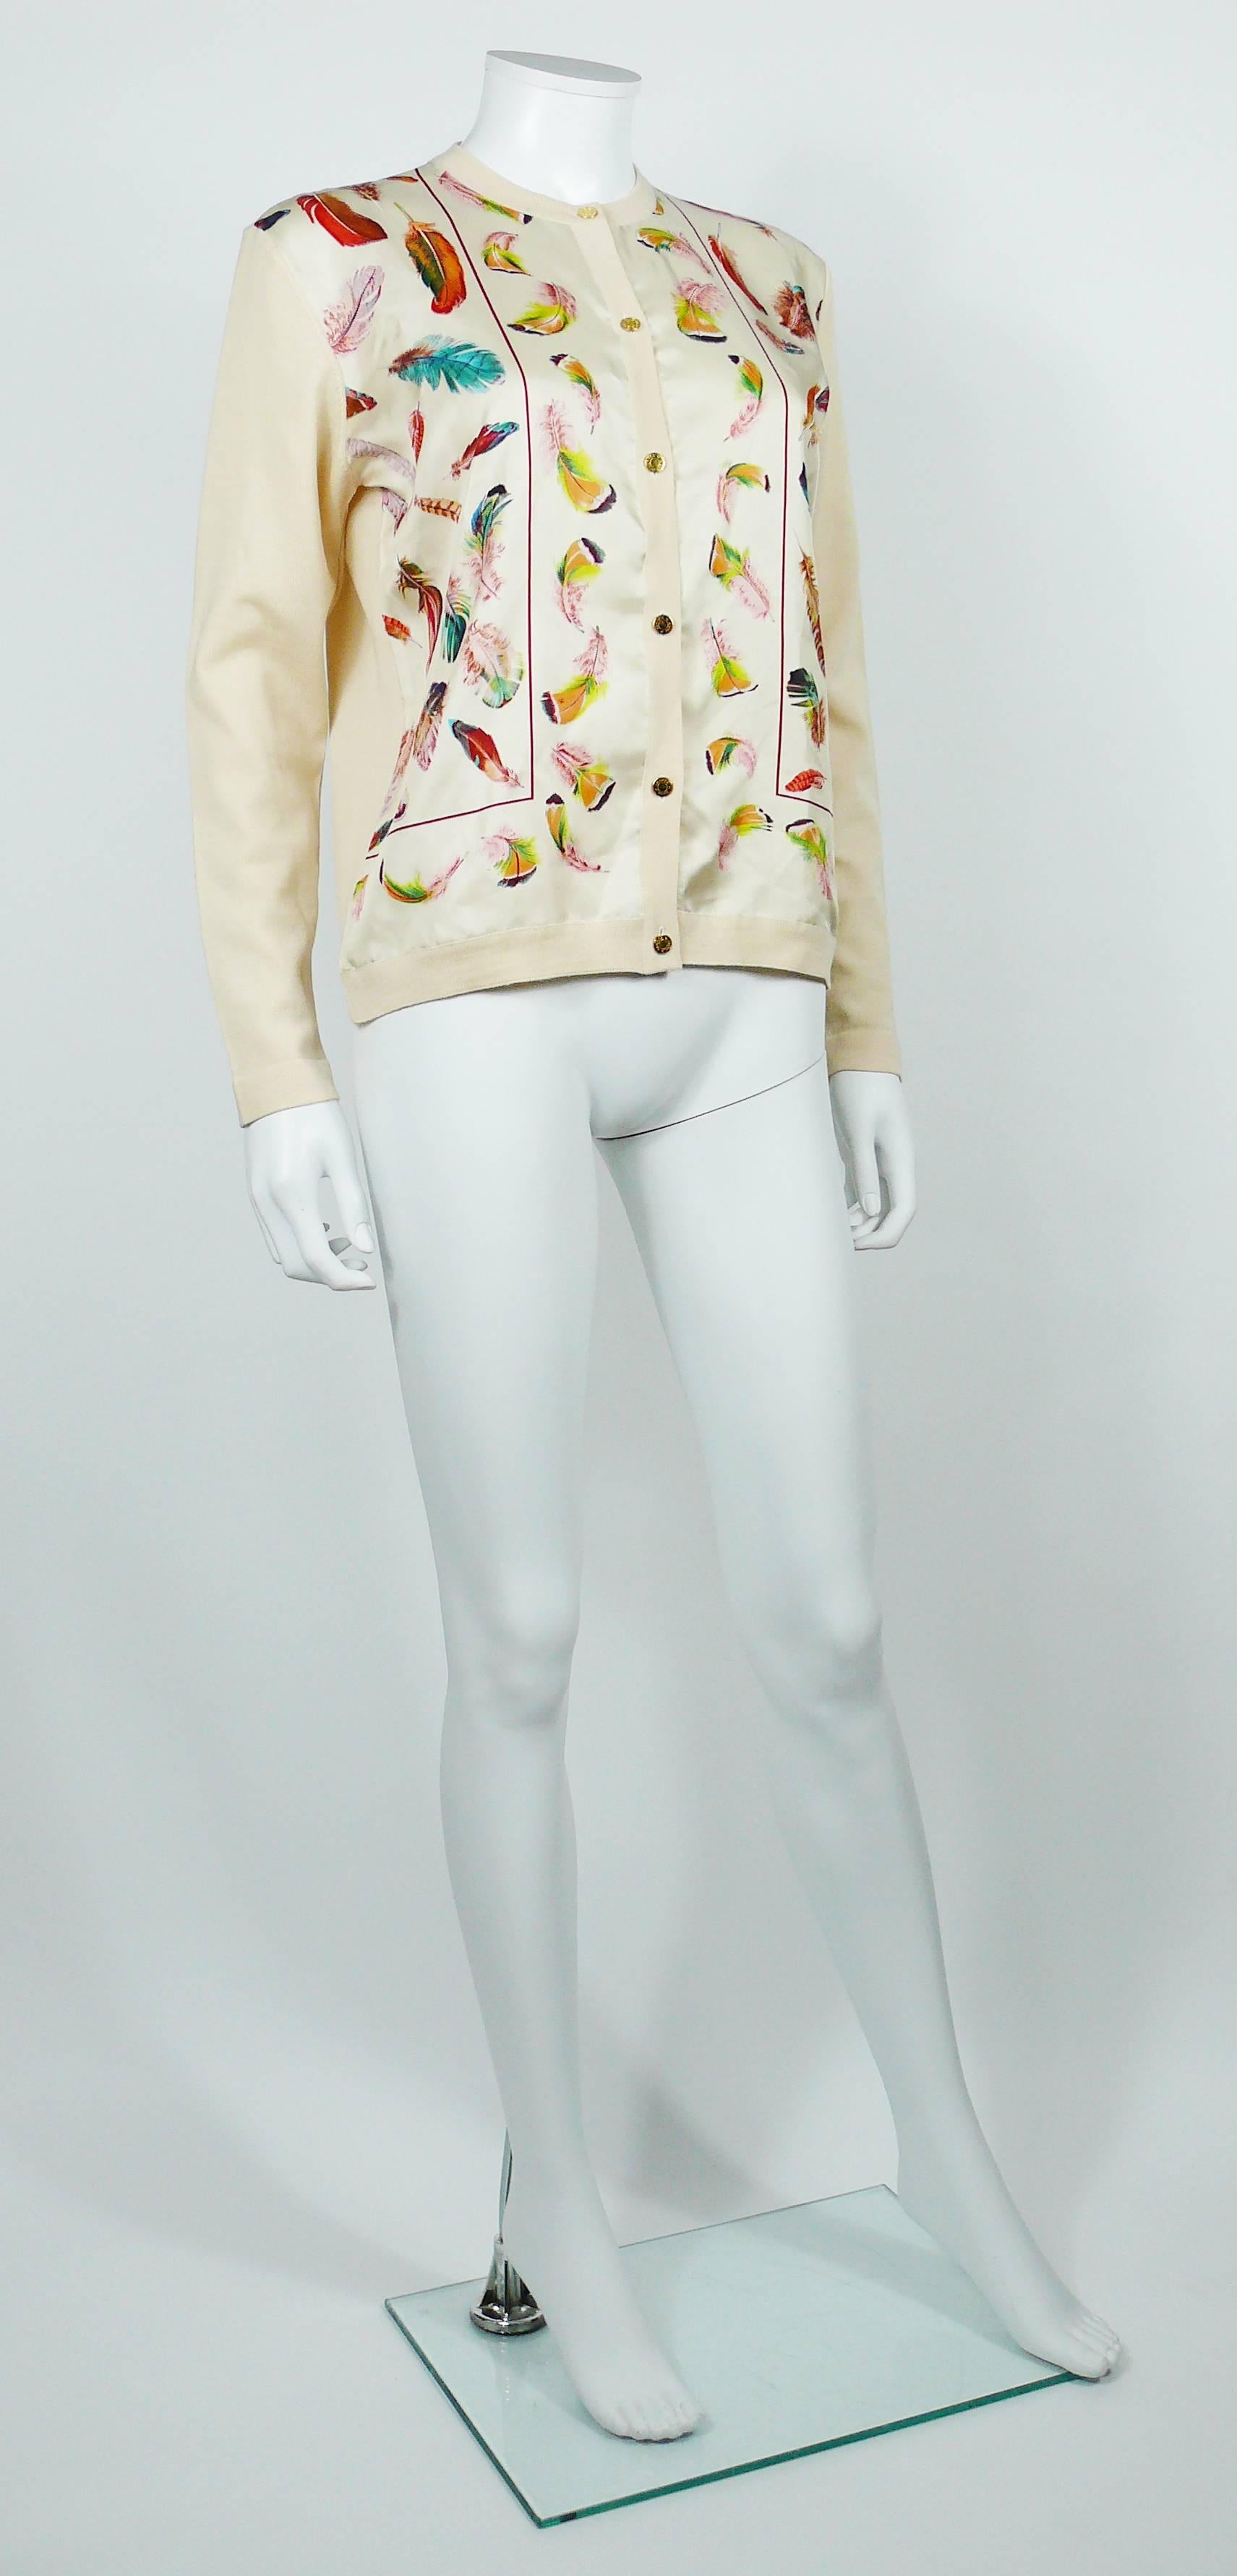 HERMES vintage feather print silk and wool cardigan sweater.

This sweater features :
- Silk panels front with a multicolored feather print on an off-white background.
- Wool sleeves and back.
- Round neck.
- Long sleeves.
- Front buttoning.
- Gold